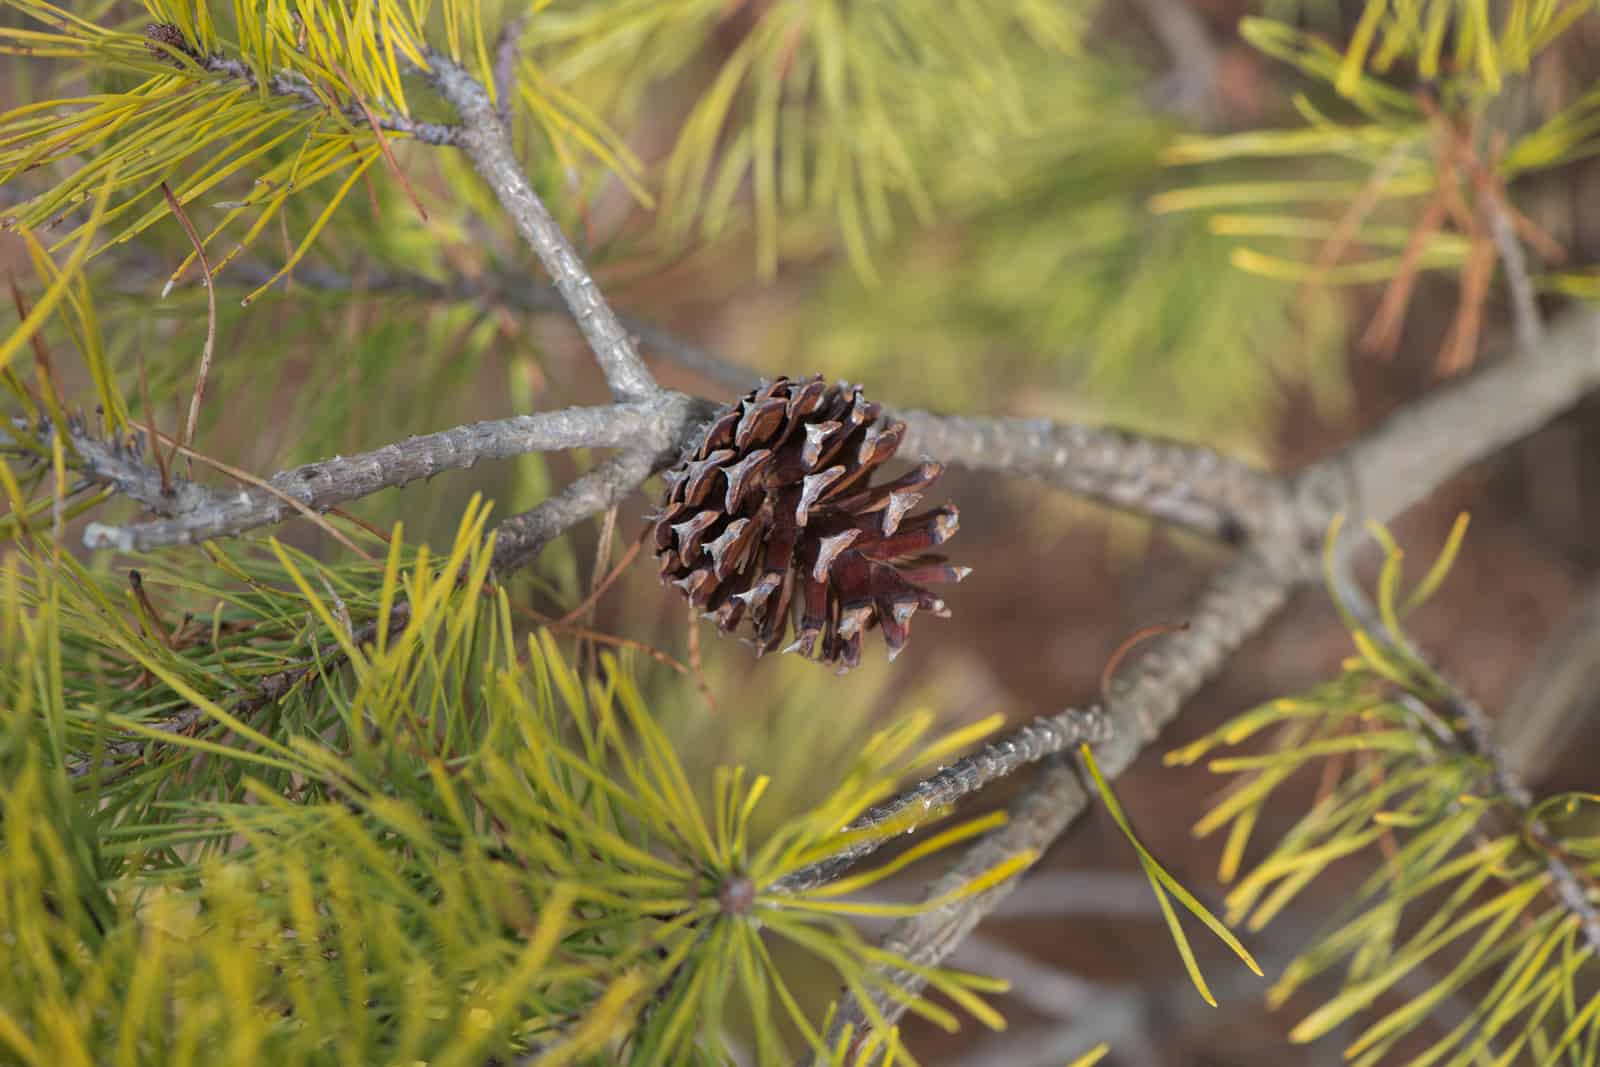 a pinecone in a tree with golden needles